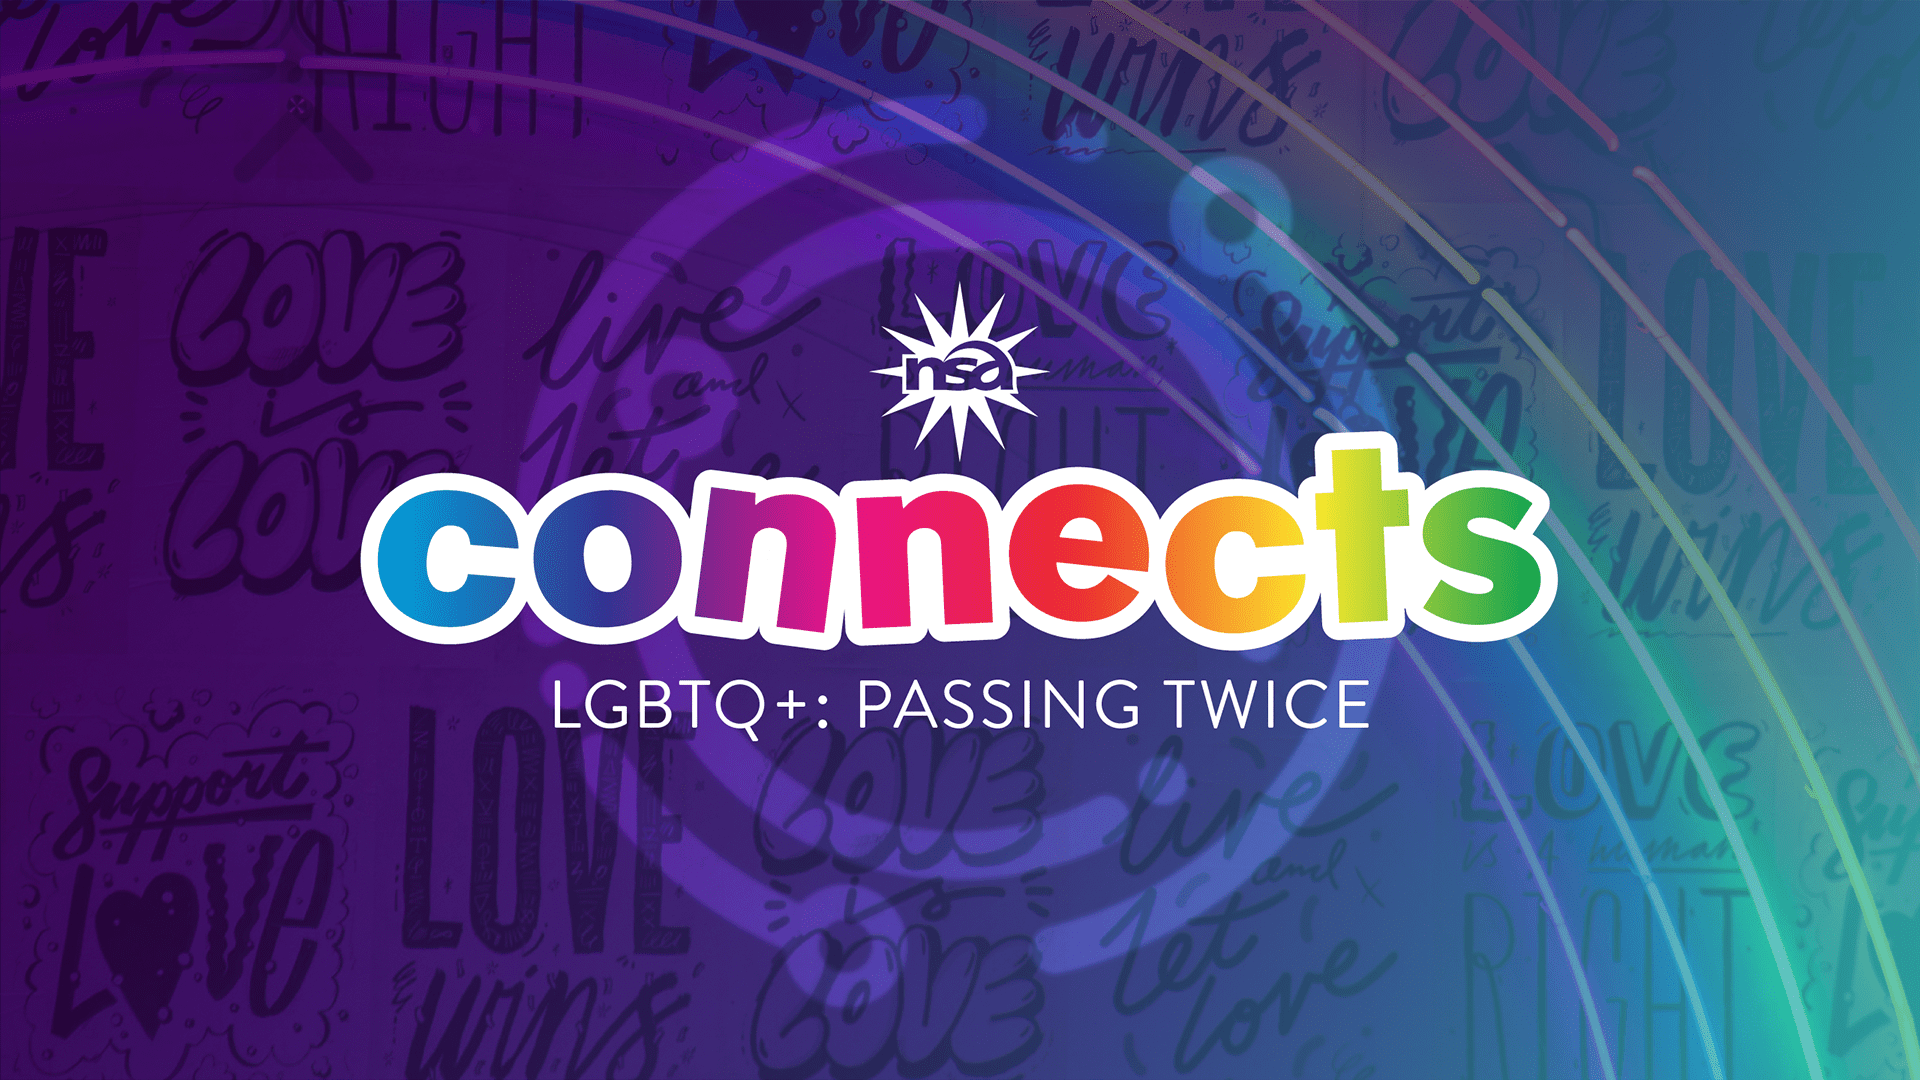 A banner with a purple and blue gradient background, featuring the NSA logo and the word "connects" in colorful letters. Below, text reads "LGBTQ+: Passing Twice." The background includes faint text with phrases like "Love is Love" and "Live your truth.